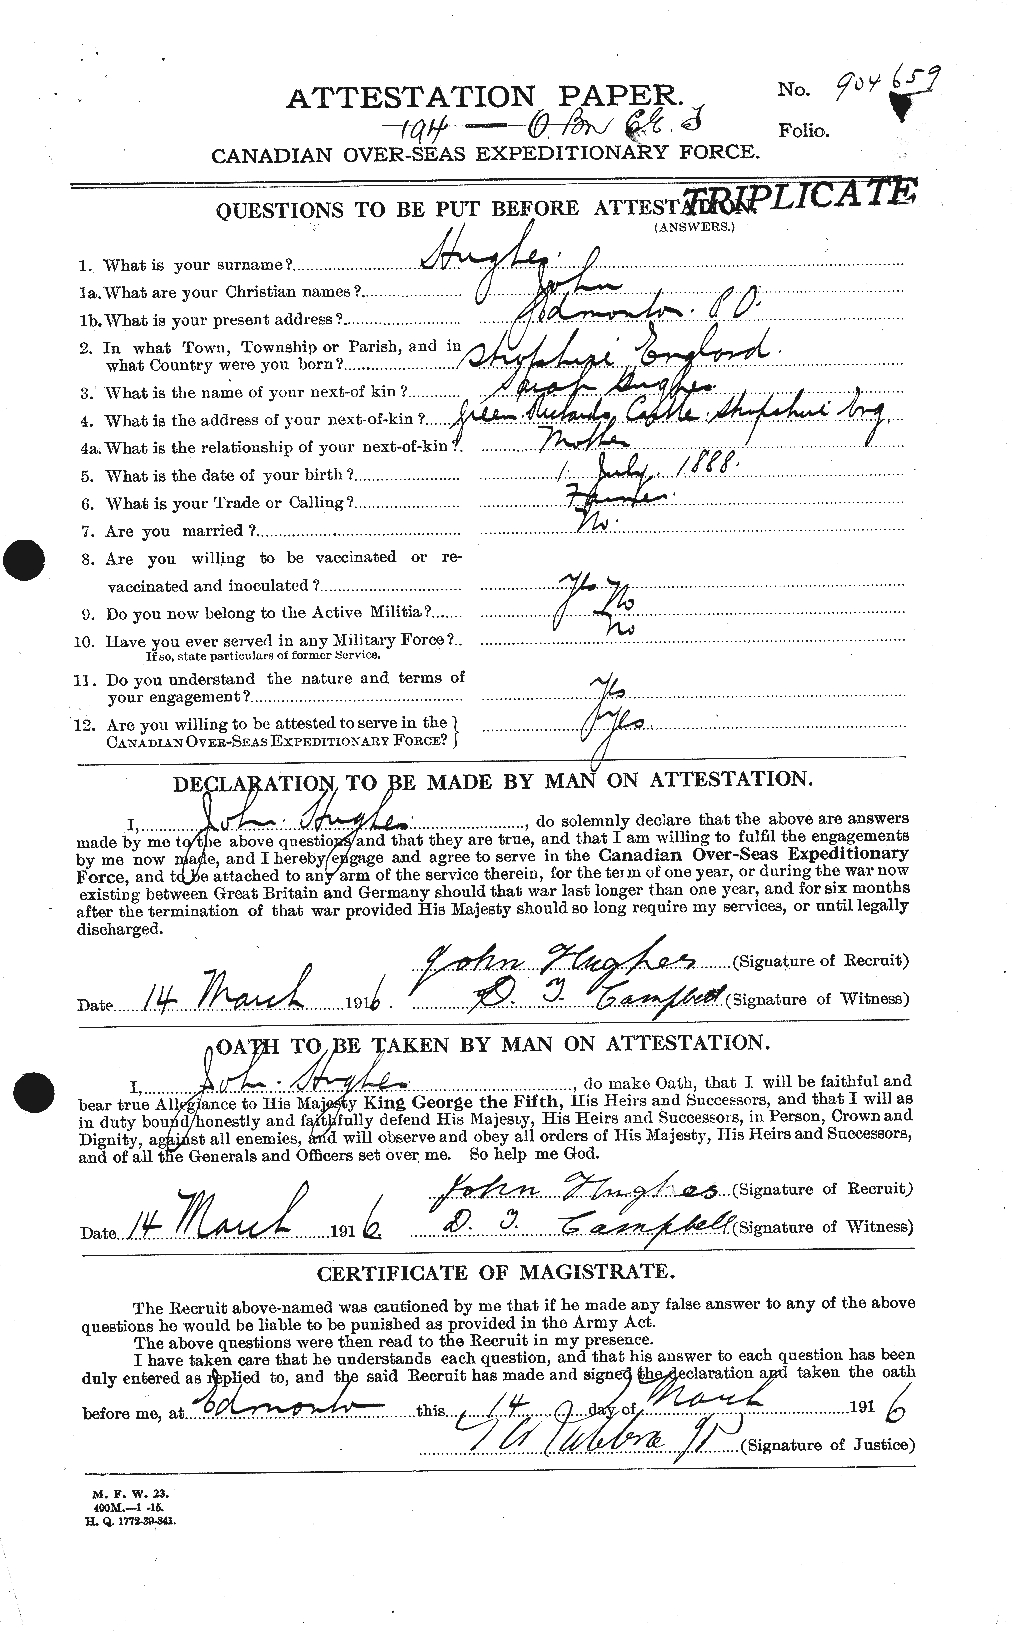 Personnel Records of the First World War - CEF 403989a